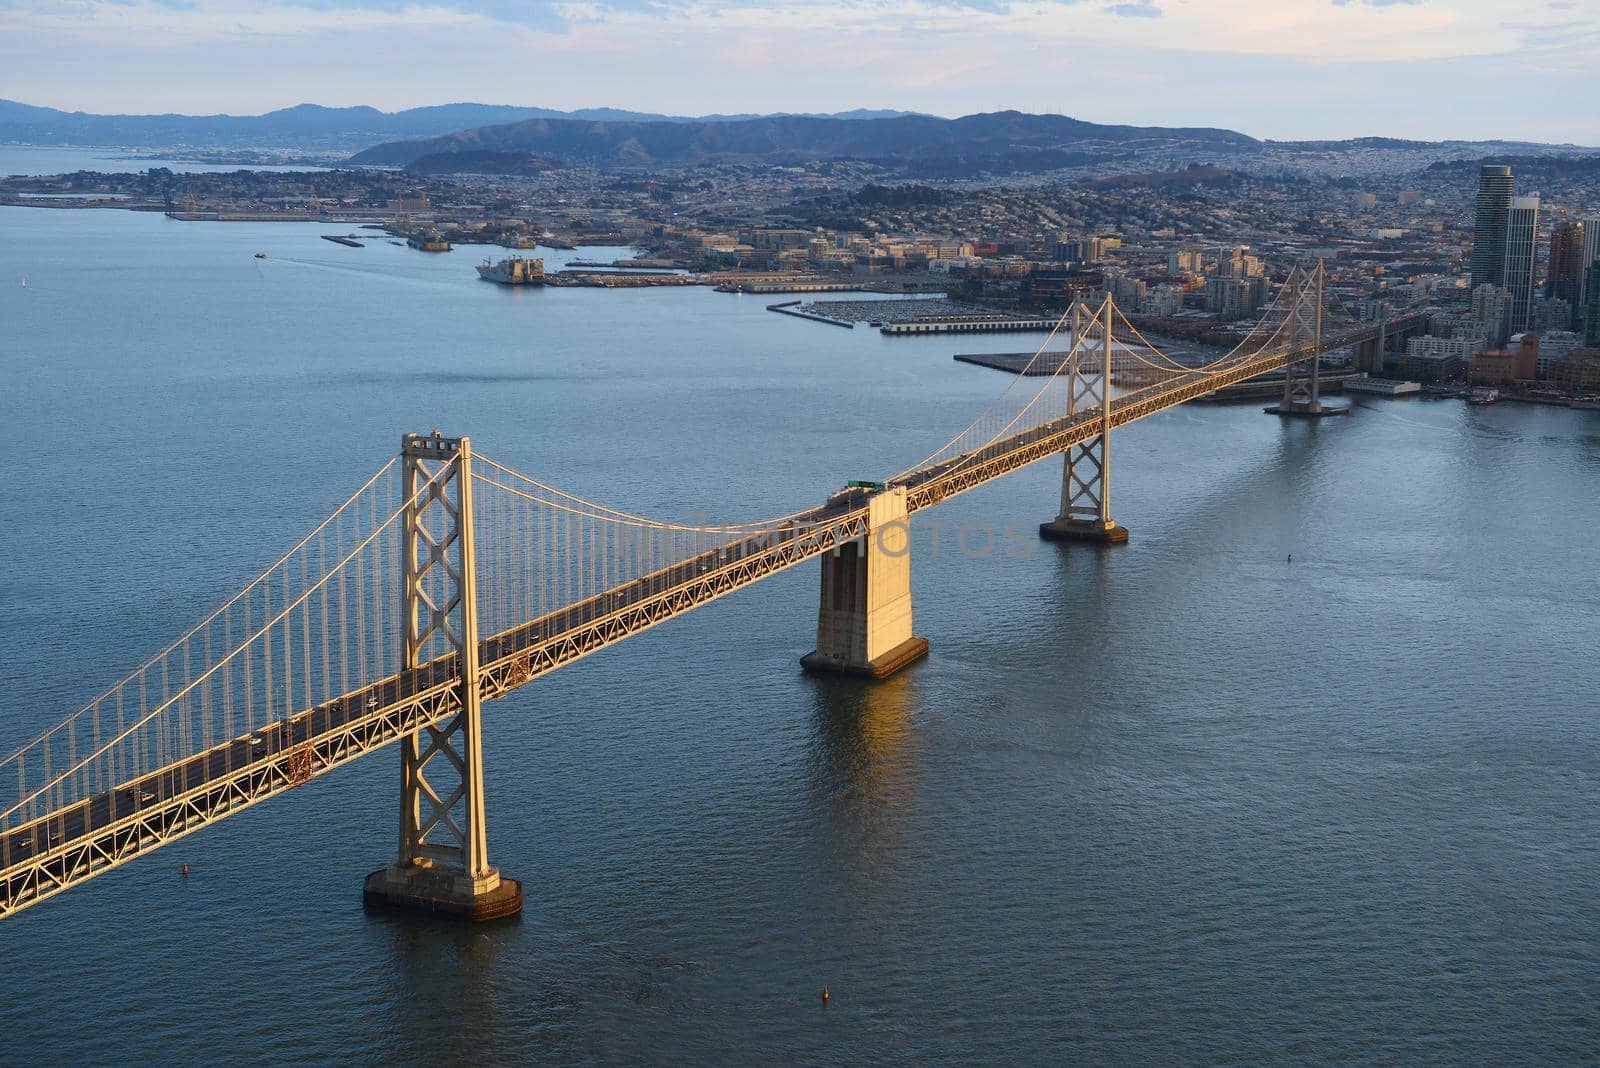 bay bridge from helicopter by porbital